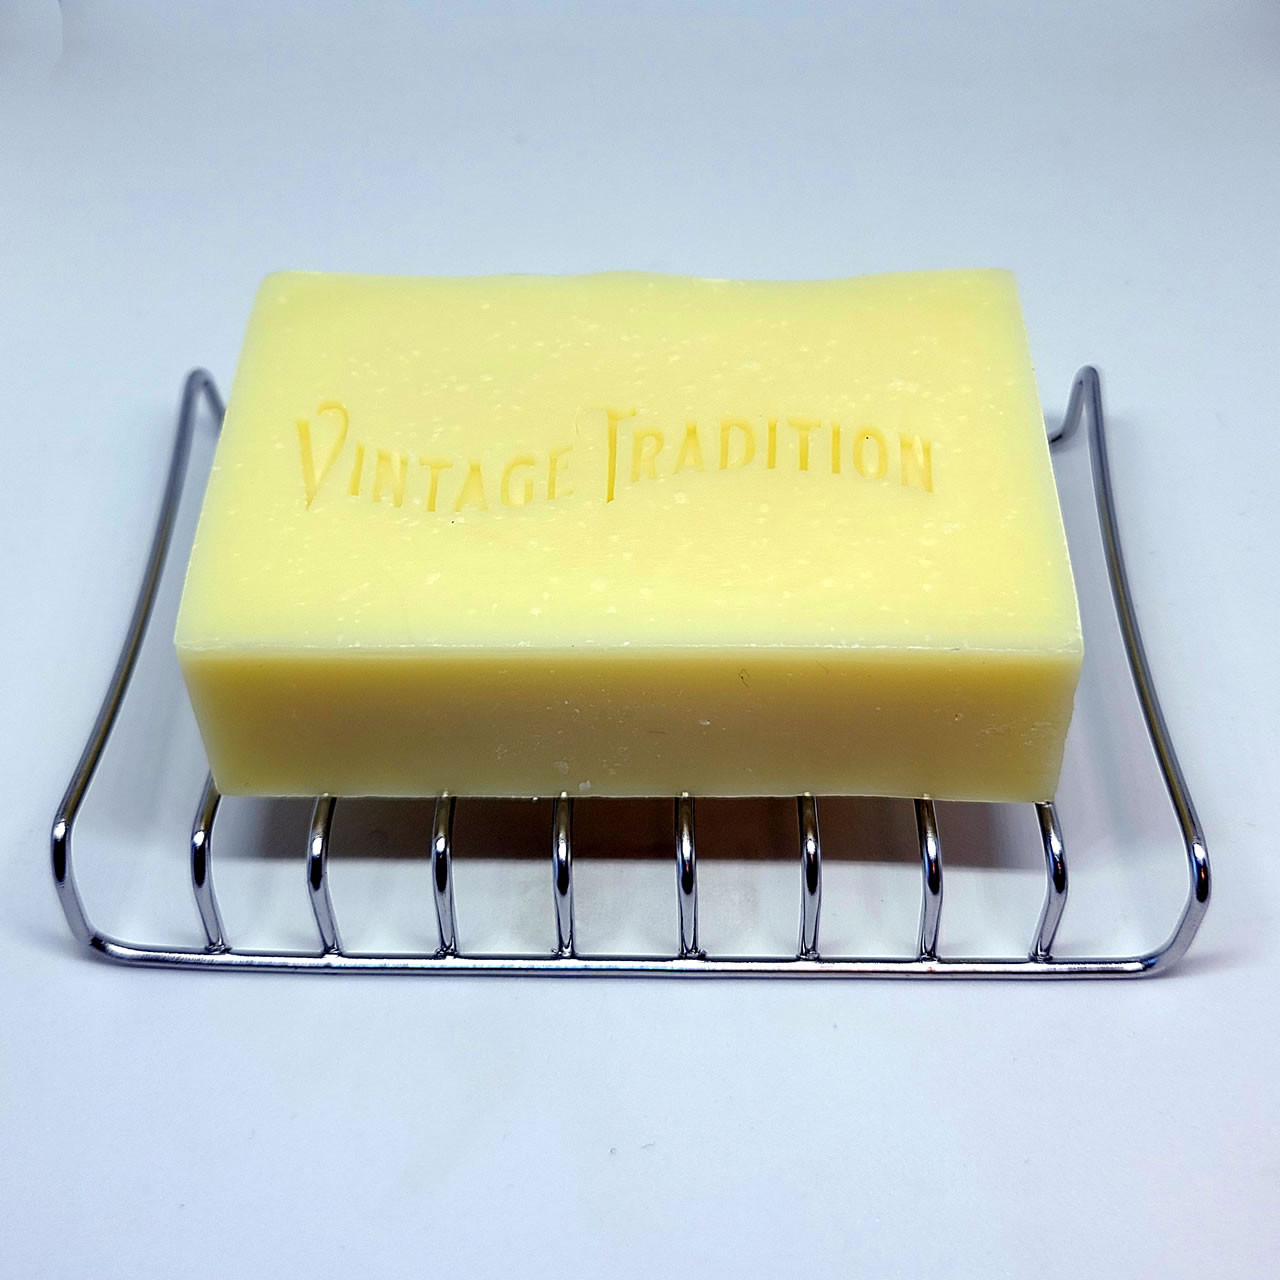 Stainless Steel Soap Bar And Stainless Metal Holder Vintage Excellent  Condition